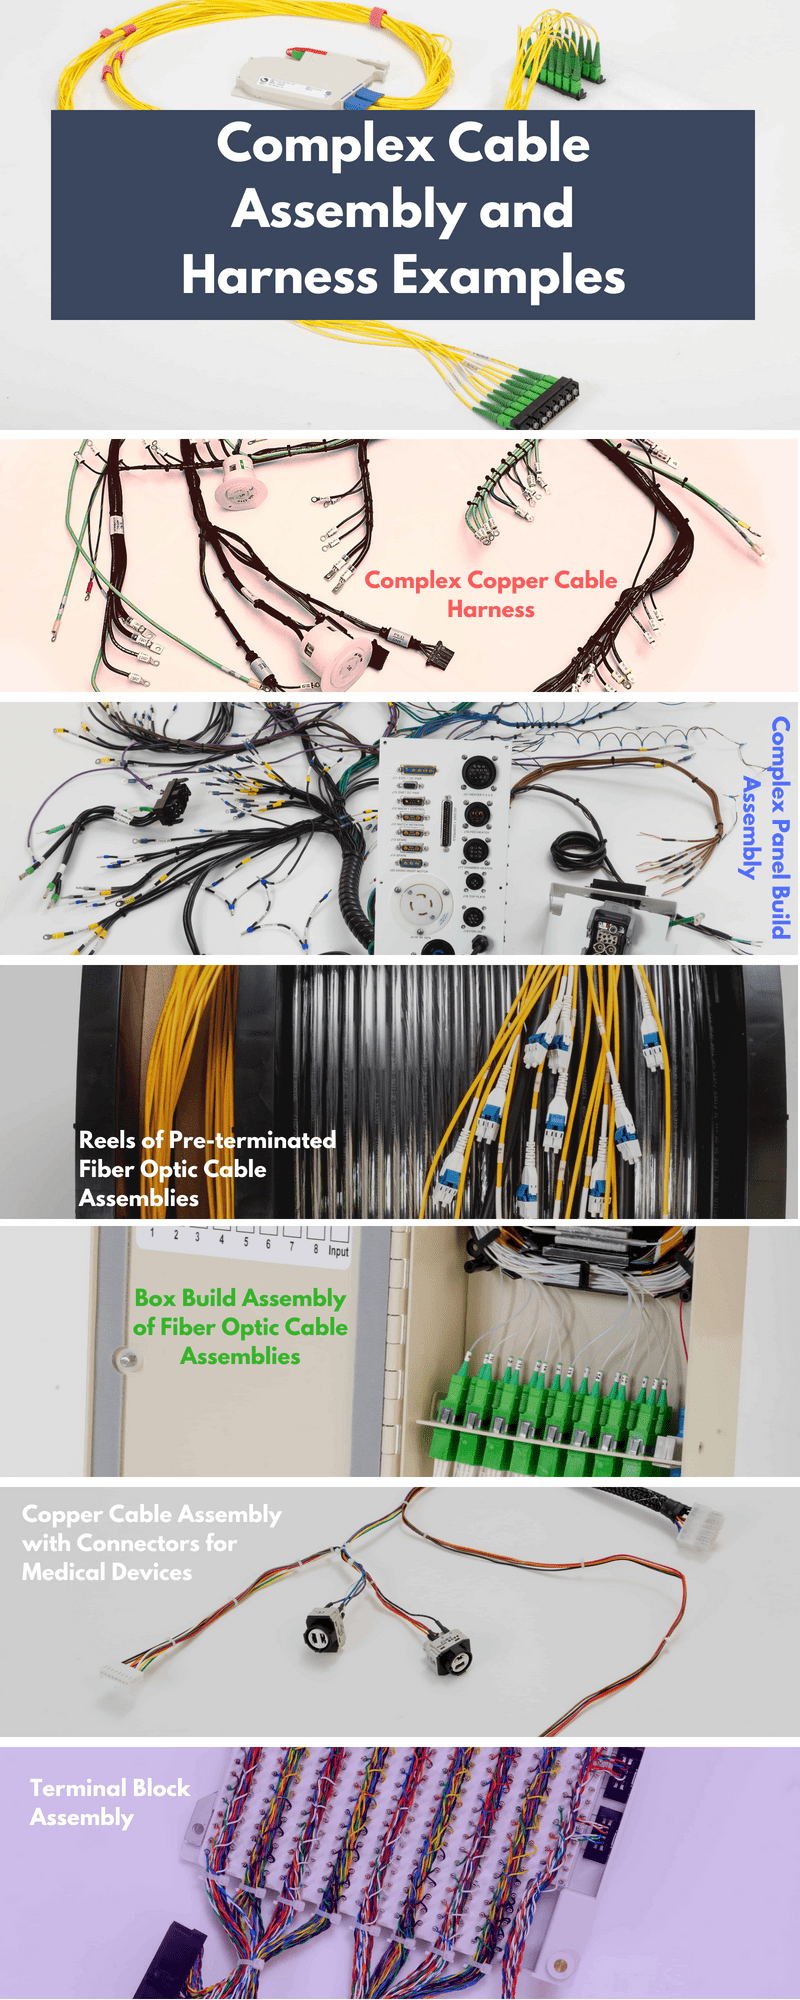 Custom Cable Harnesses and complex cable assembly image